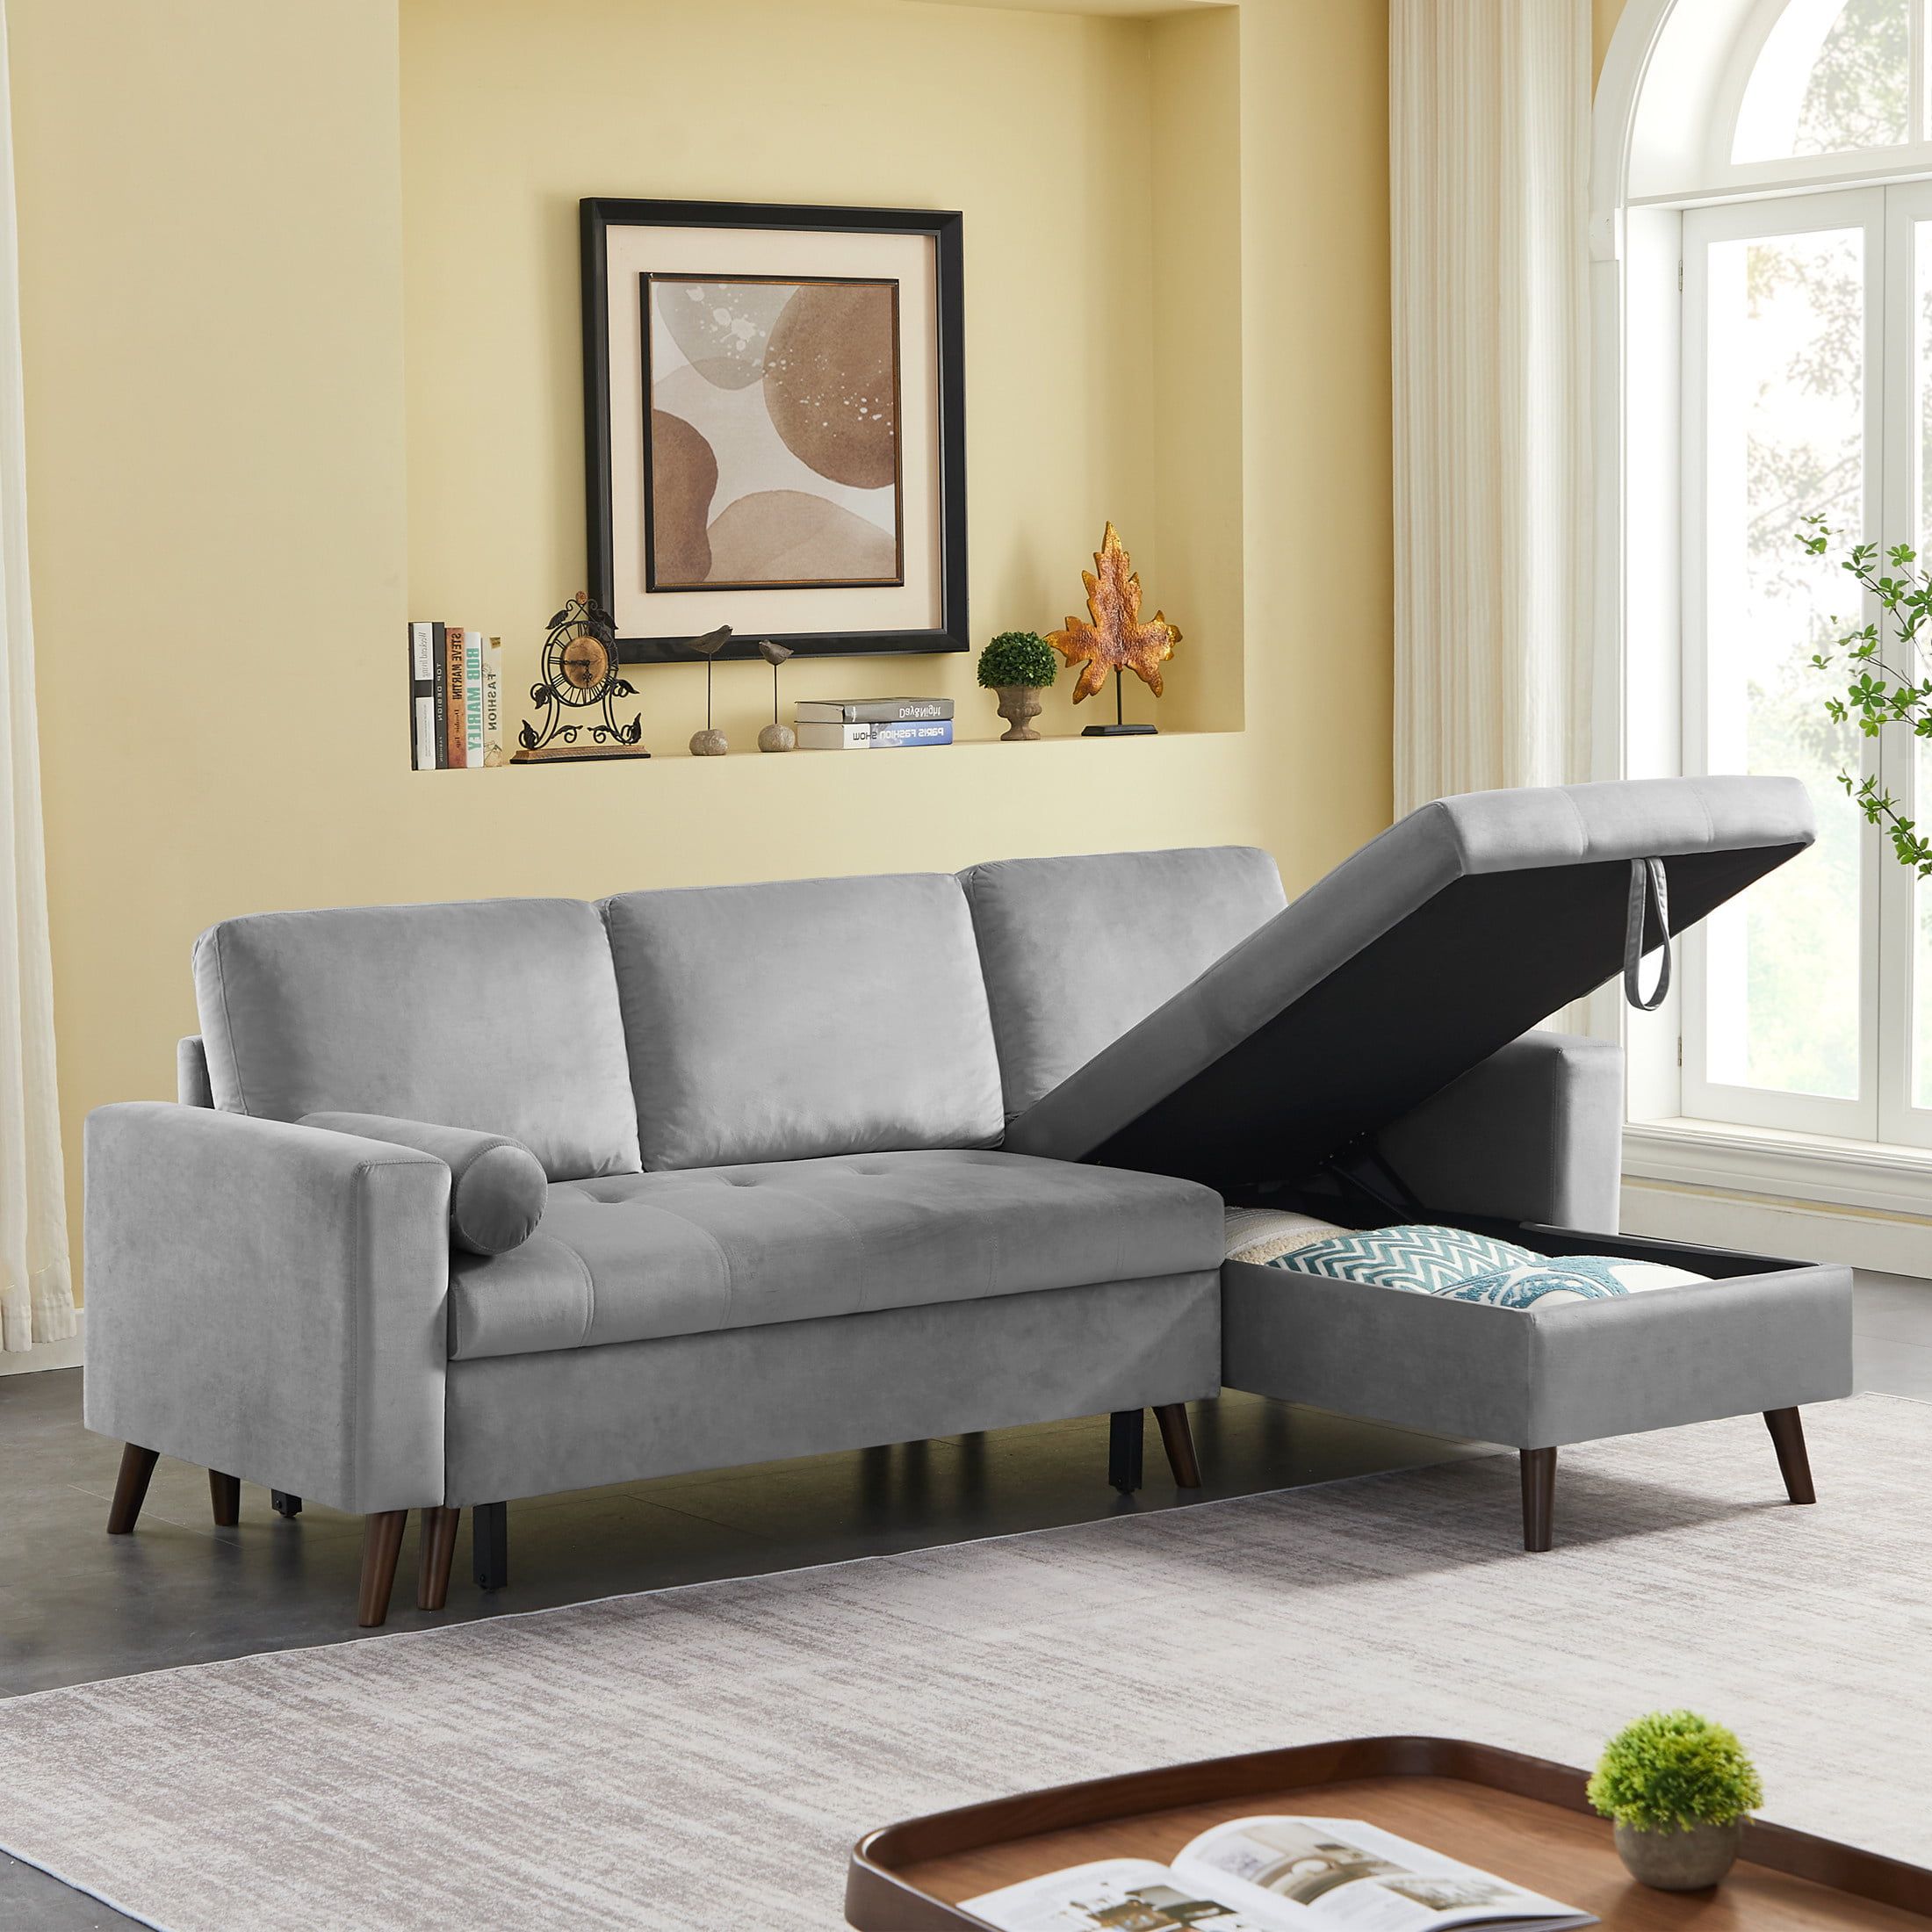 Aukfa 88" Sectional Sleeper Sofa  Pull Out Bed With Storage Chaise For  Living Room  Velvet  Gray – Walmart In Convertible Sofa With Matching Chaise (View 7 of 15)